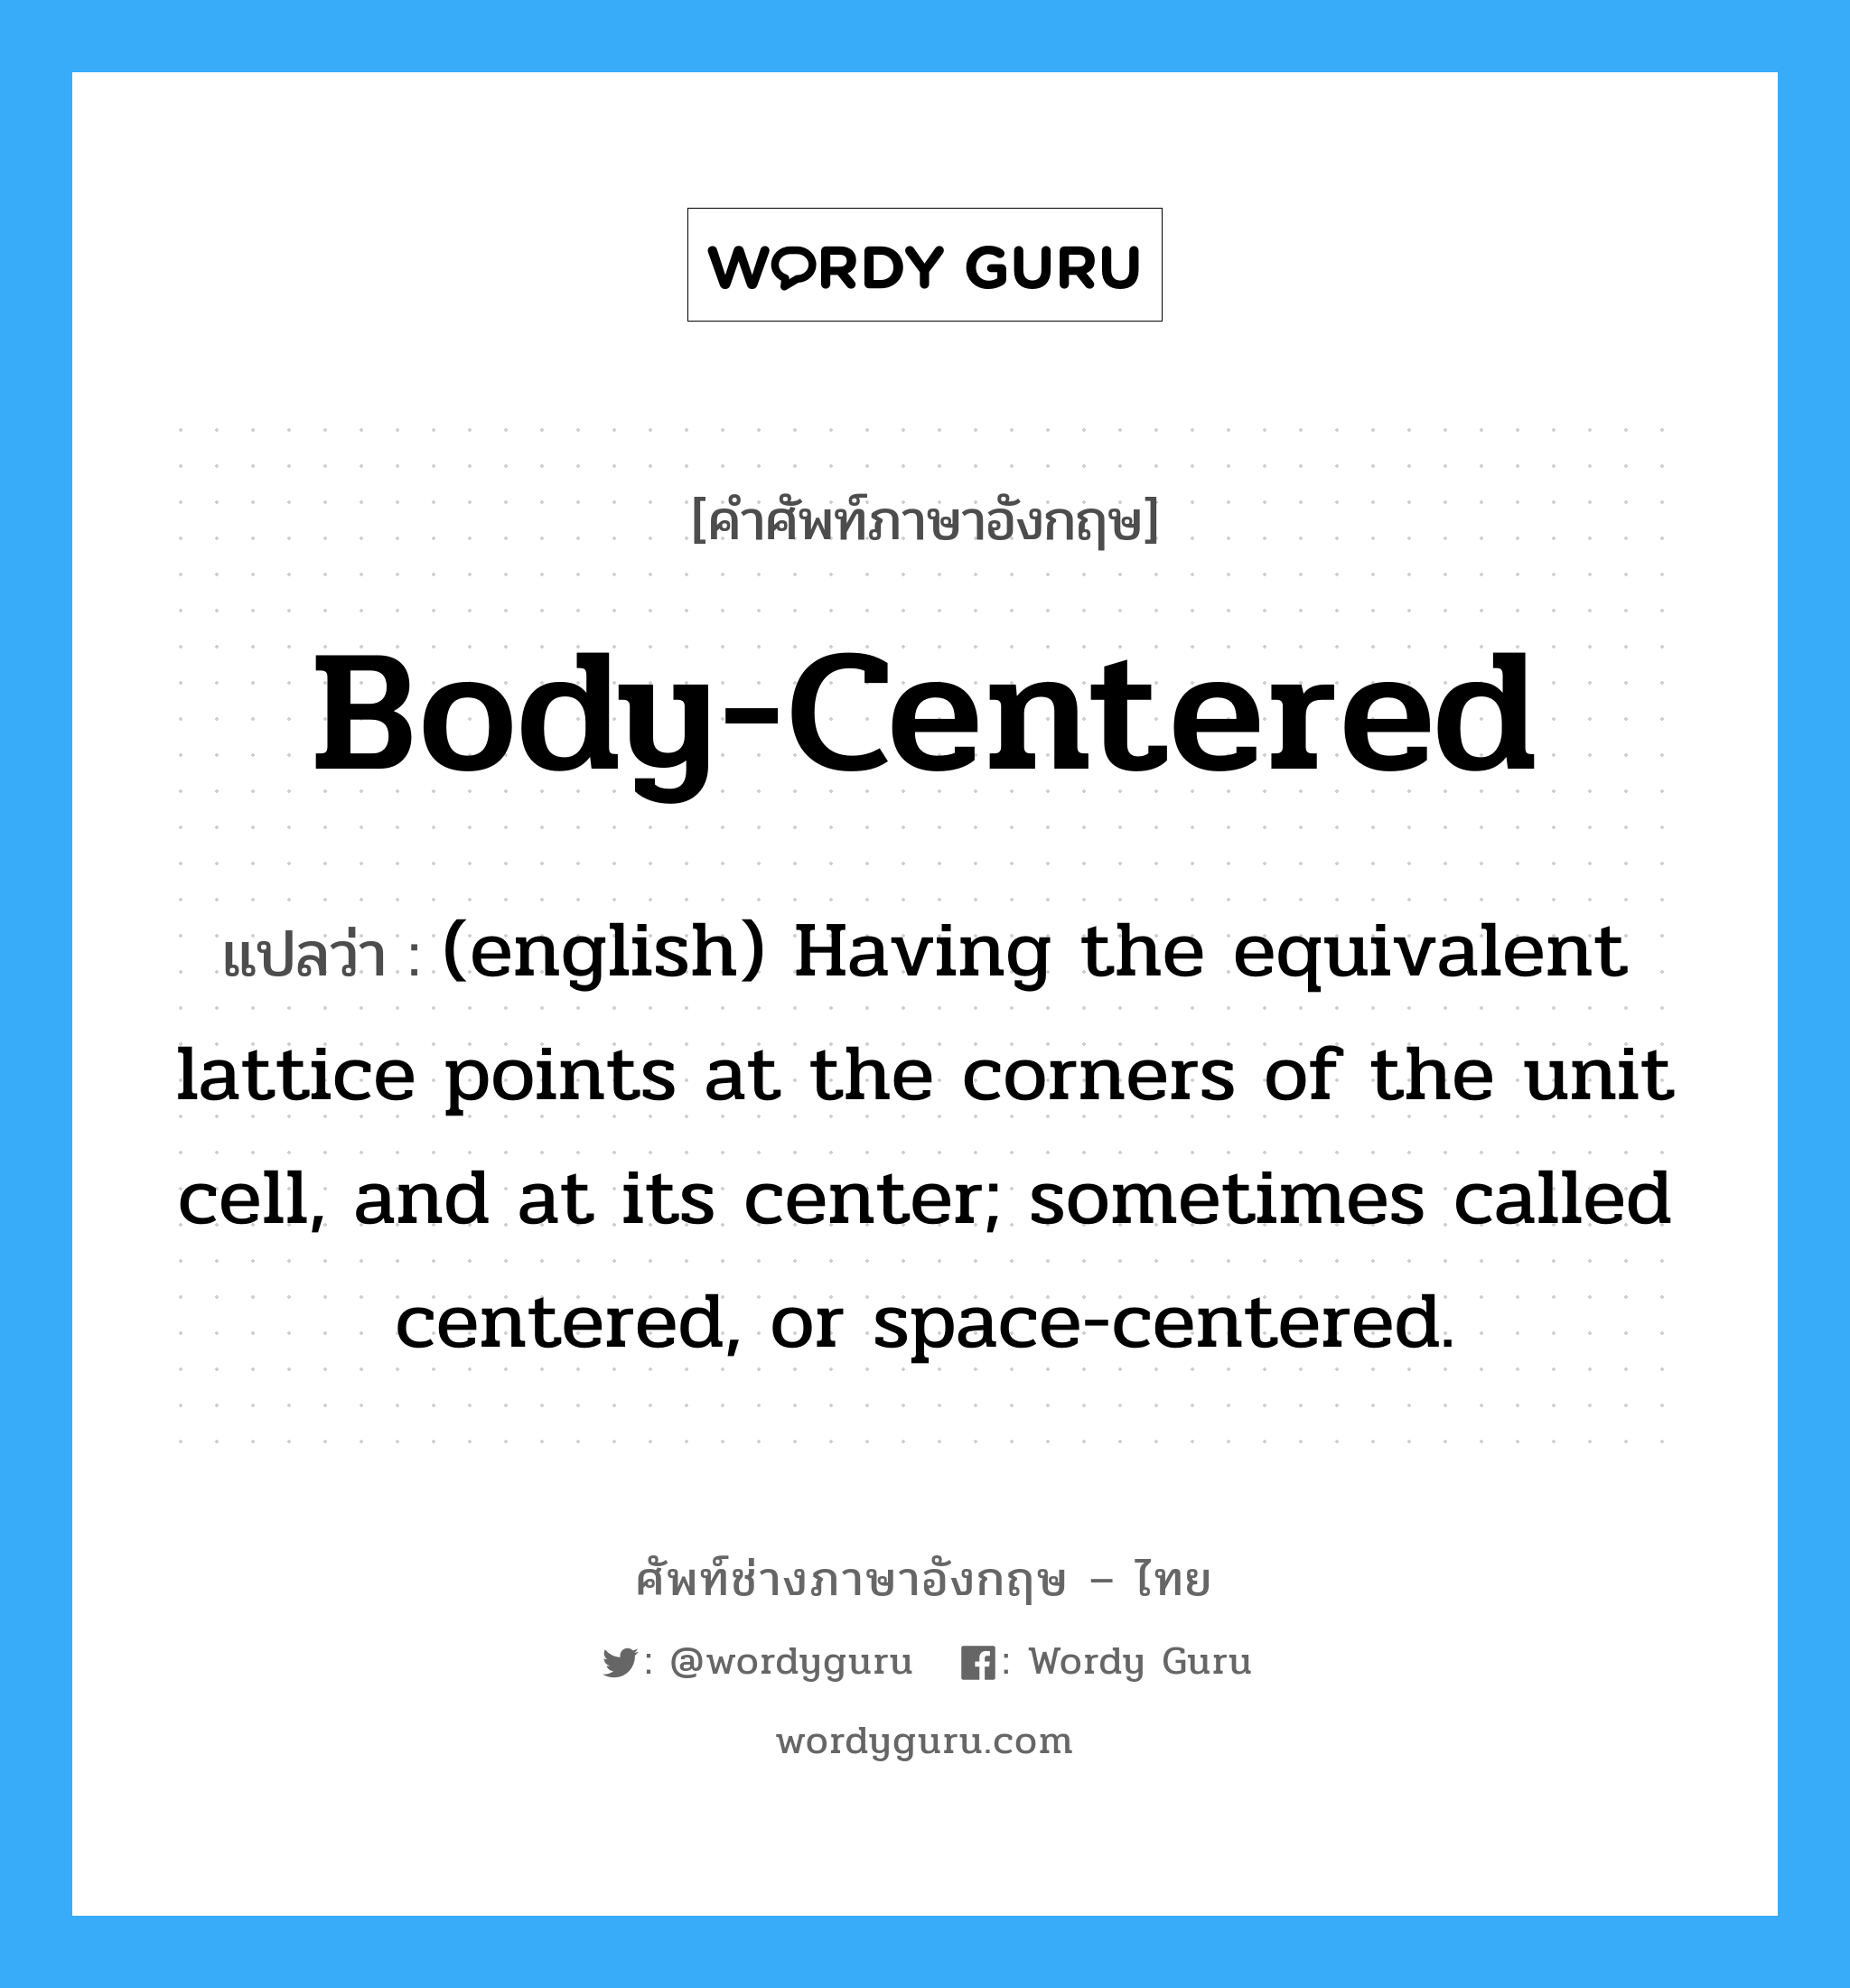 Body-Centered แปลว่า?, คำศัพท์ช่างภาษาอังกฤษ - ไทย Body-Centered คำศัพท์ภาษาอังกฤษ Body-Centered แปลว่า (english) Having the equivalent lattice points at the corners of the unit cell, and at its center; sometimes called centered, or space-centered.